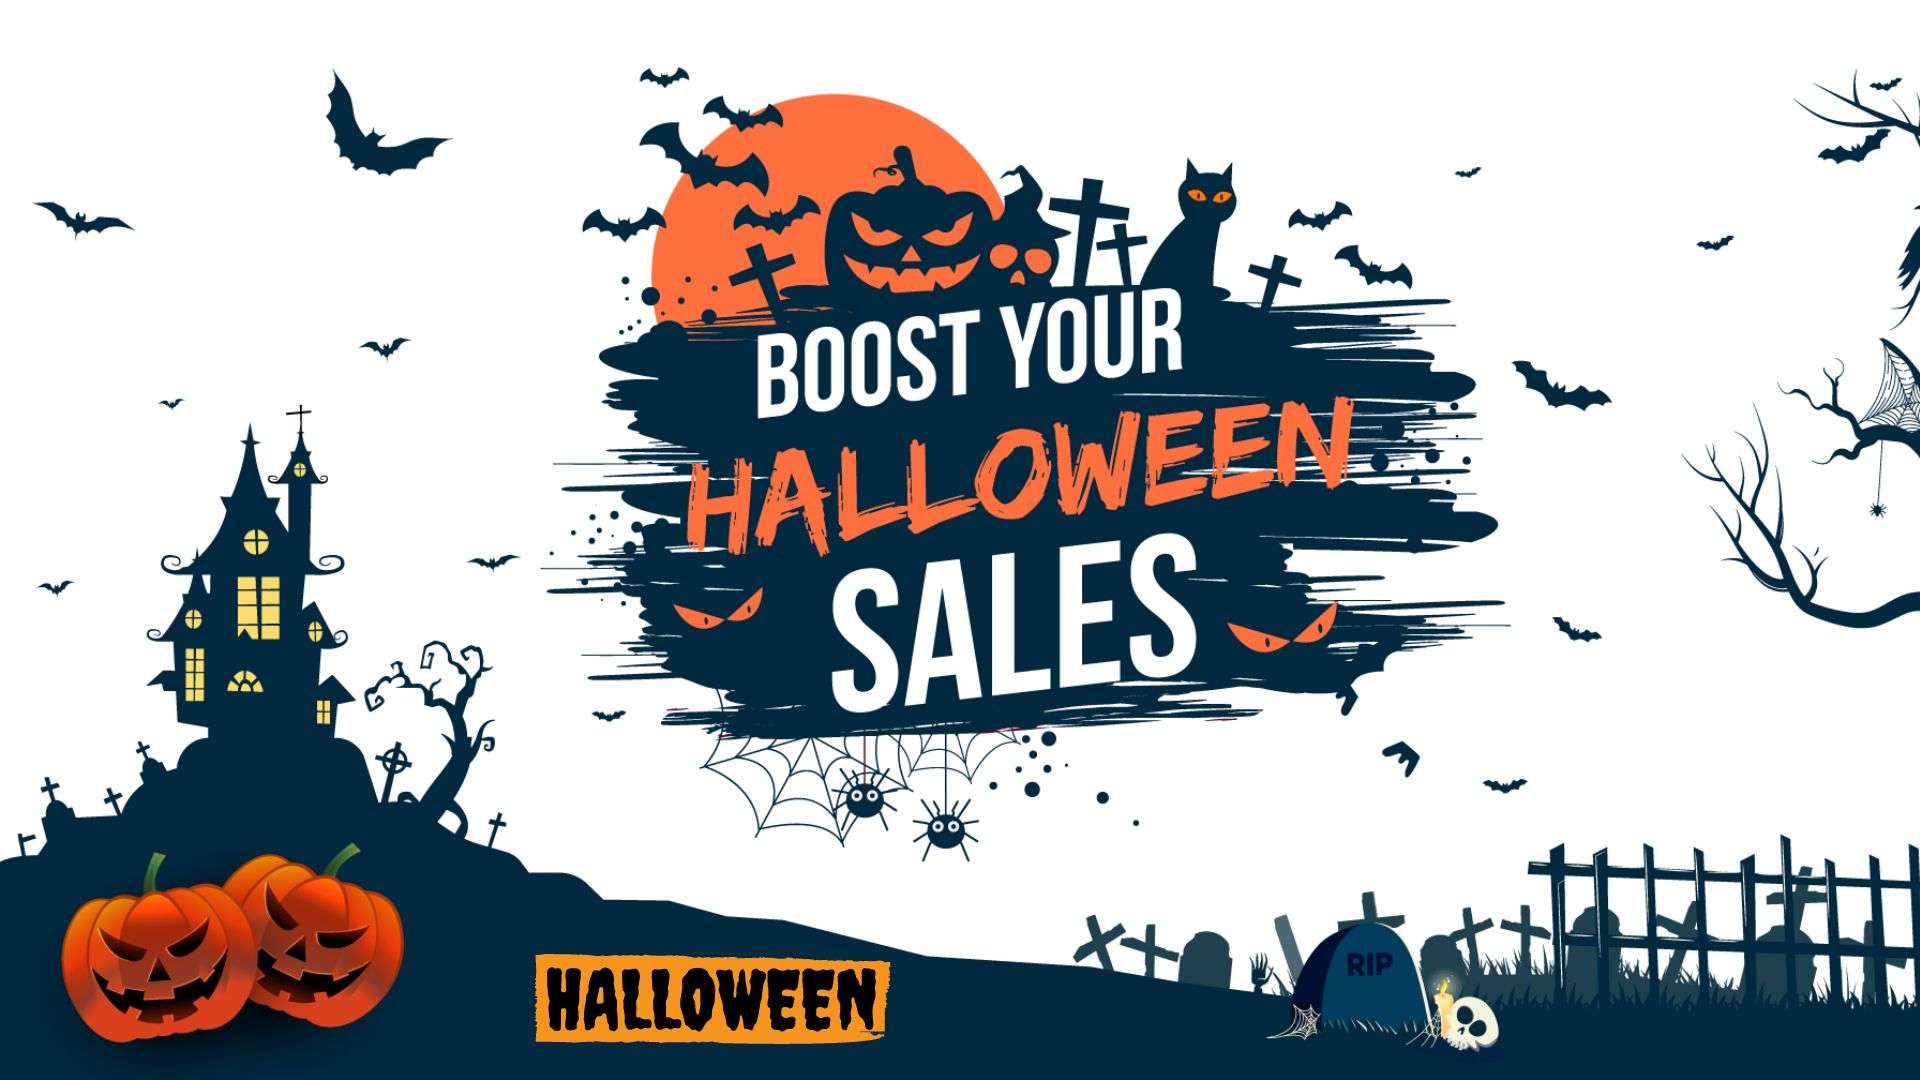 Ways to Boost Halloween Candy Sales on Ecommerce Platforms